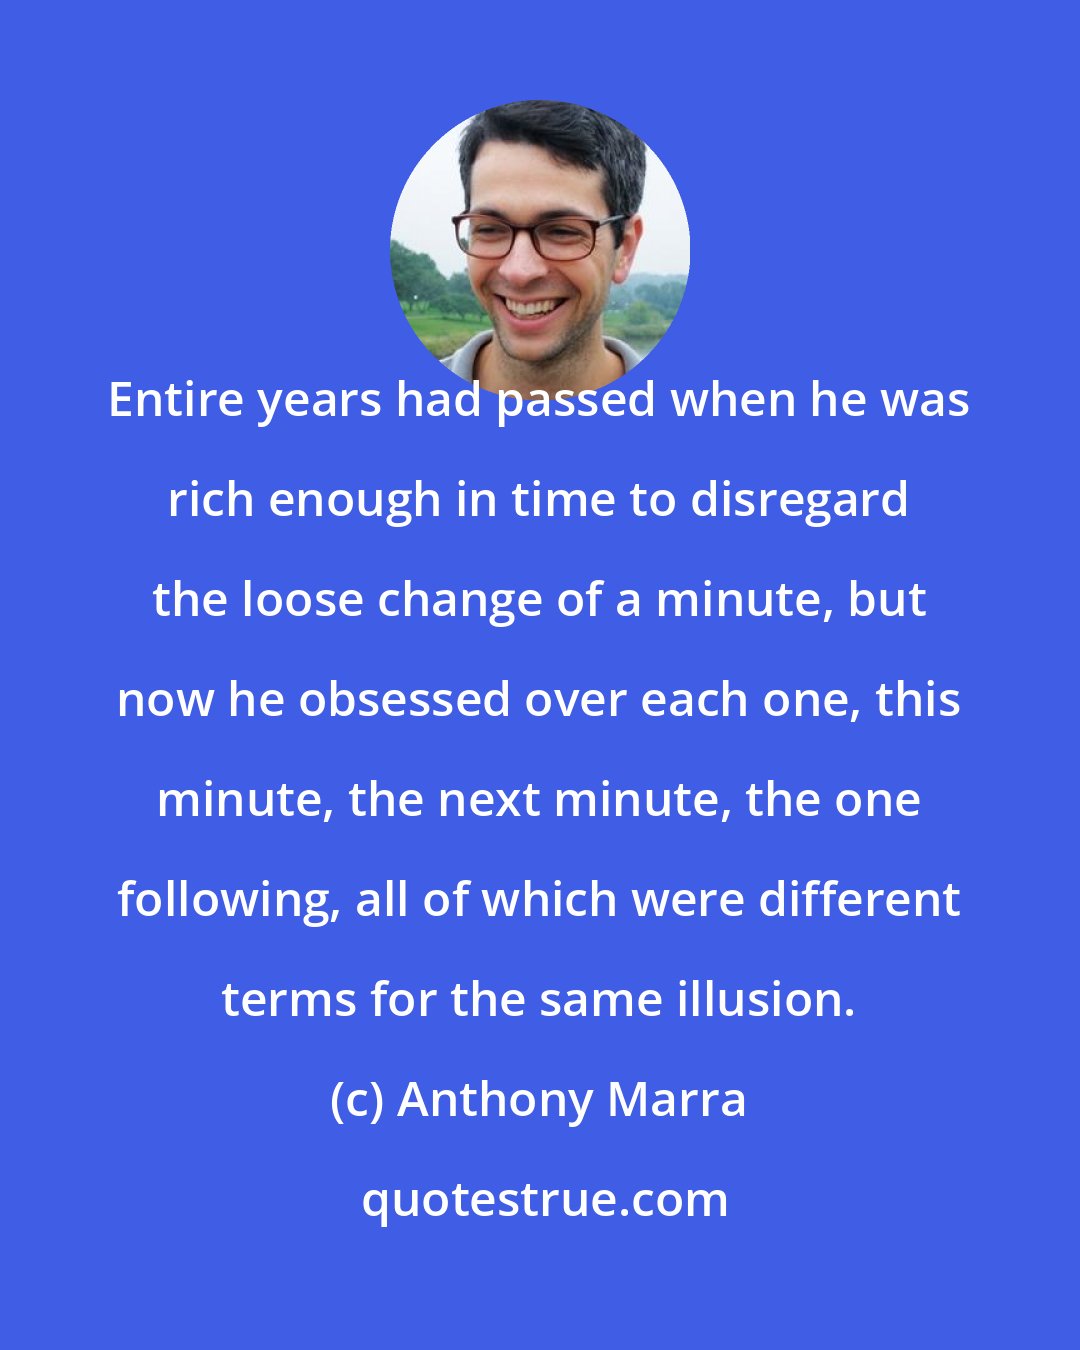 Anthony Marra: Entire years had passed when he was rich enough in time to disregard the loose change of a minute, but now he obsessed over each one, this minute, the next minute, the one following, all of which were different terms for the same illusion.